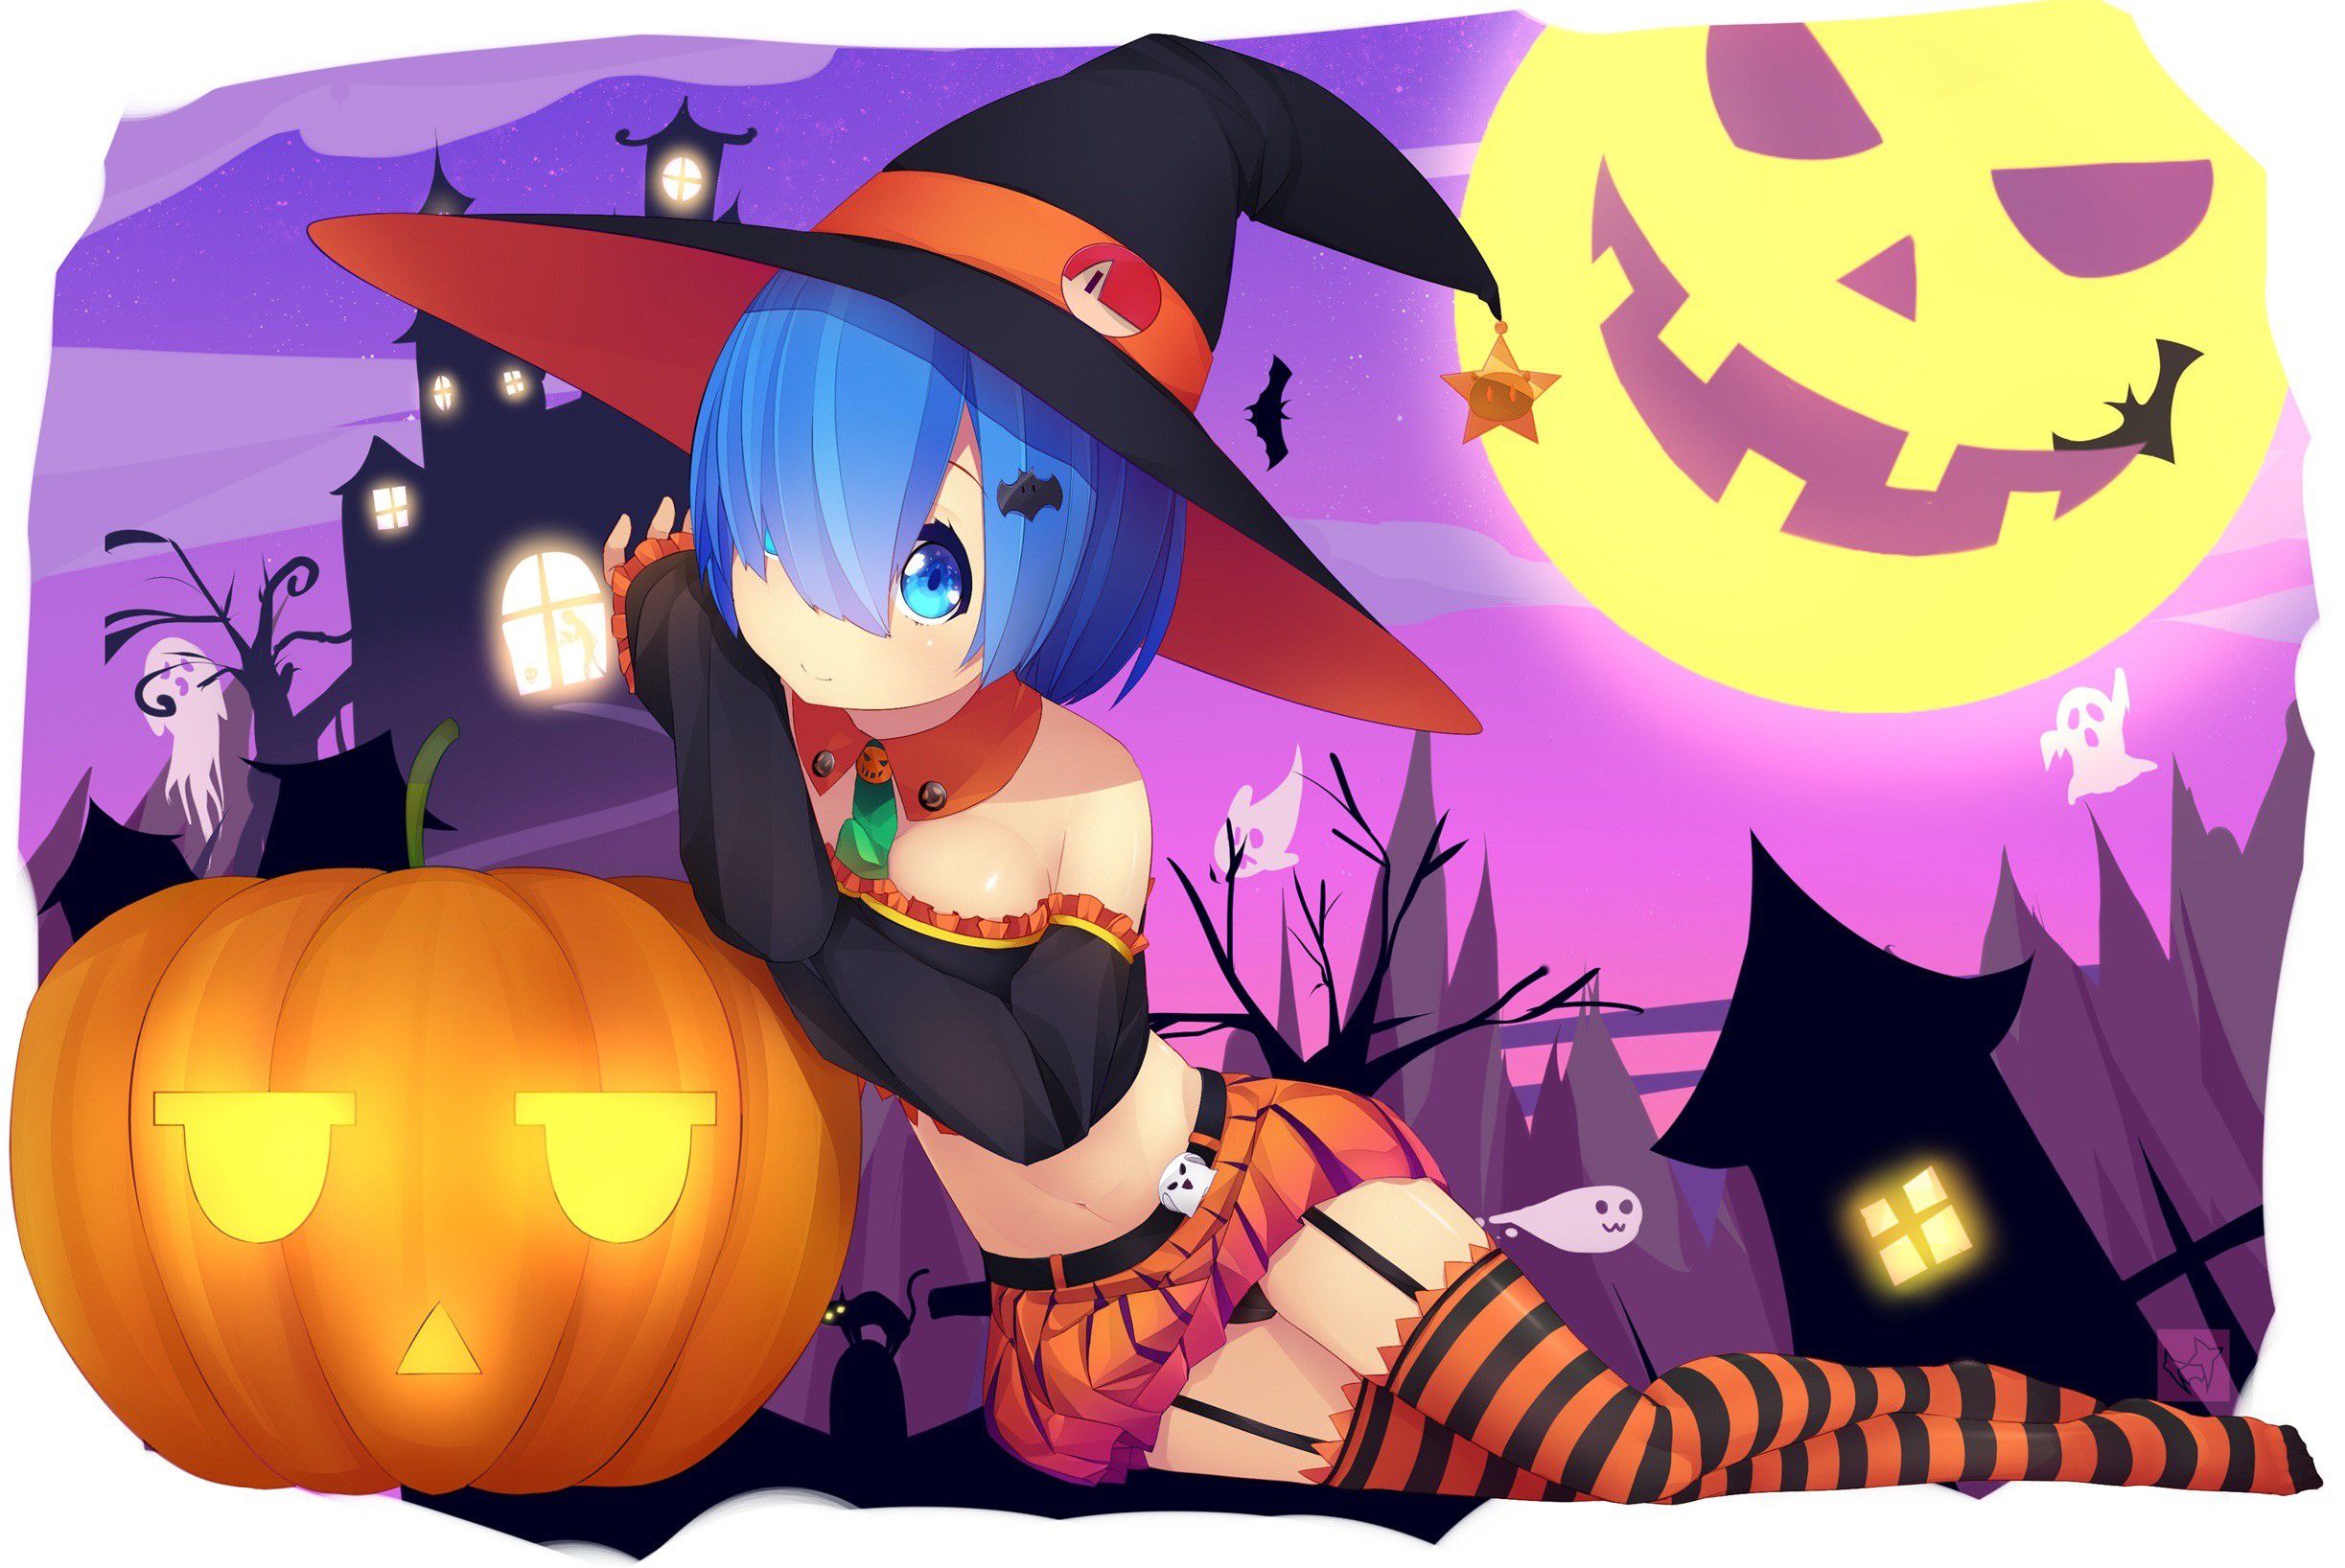 Secondary image of the cute girl who did the Halloween costume Part 2 [non-erotic] 7